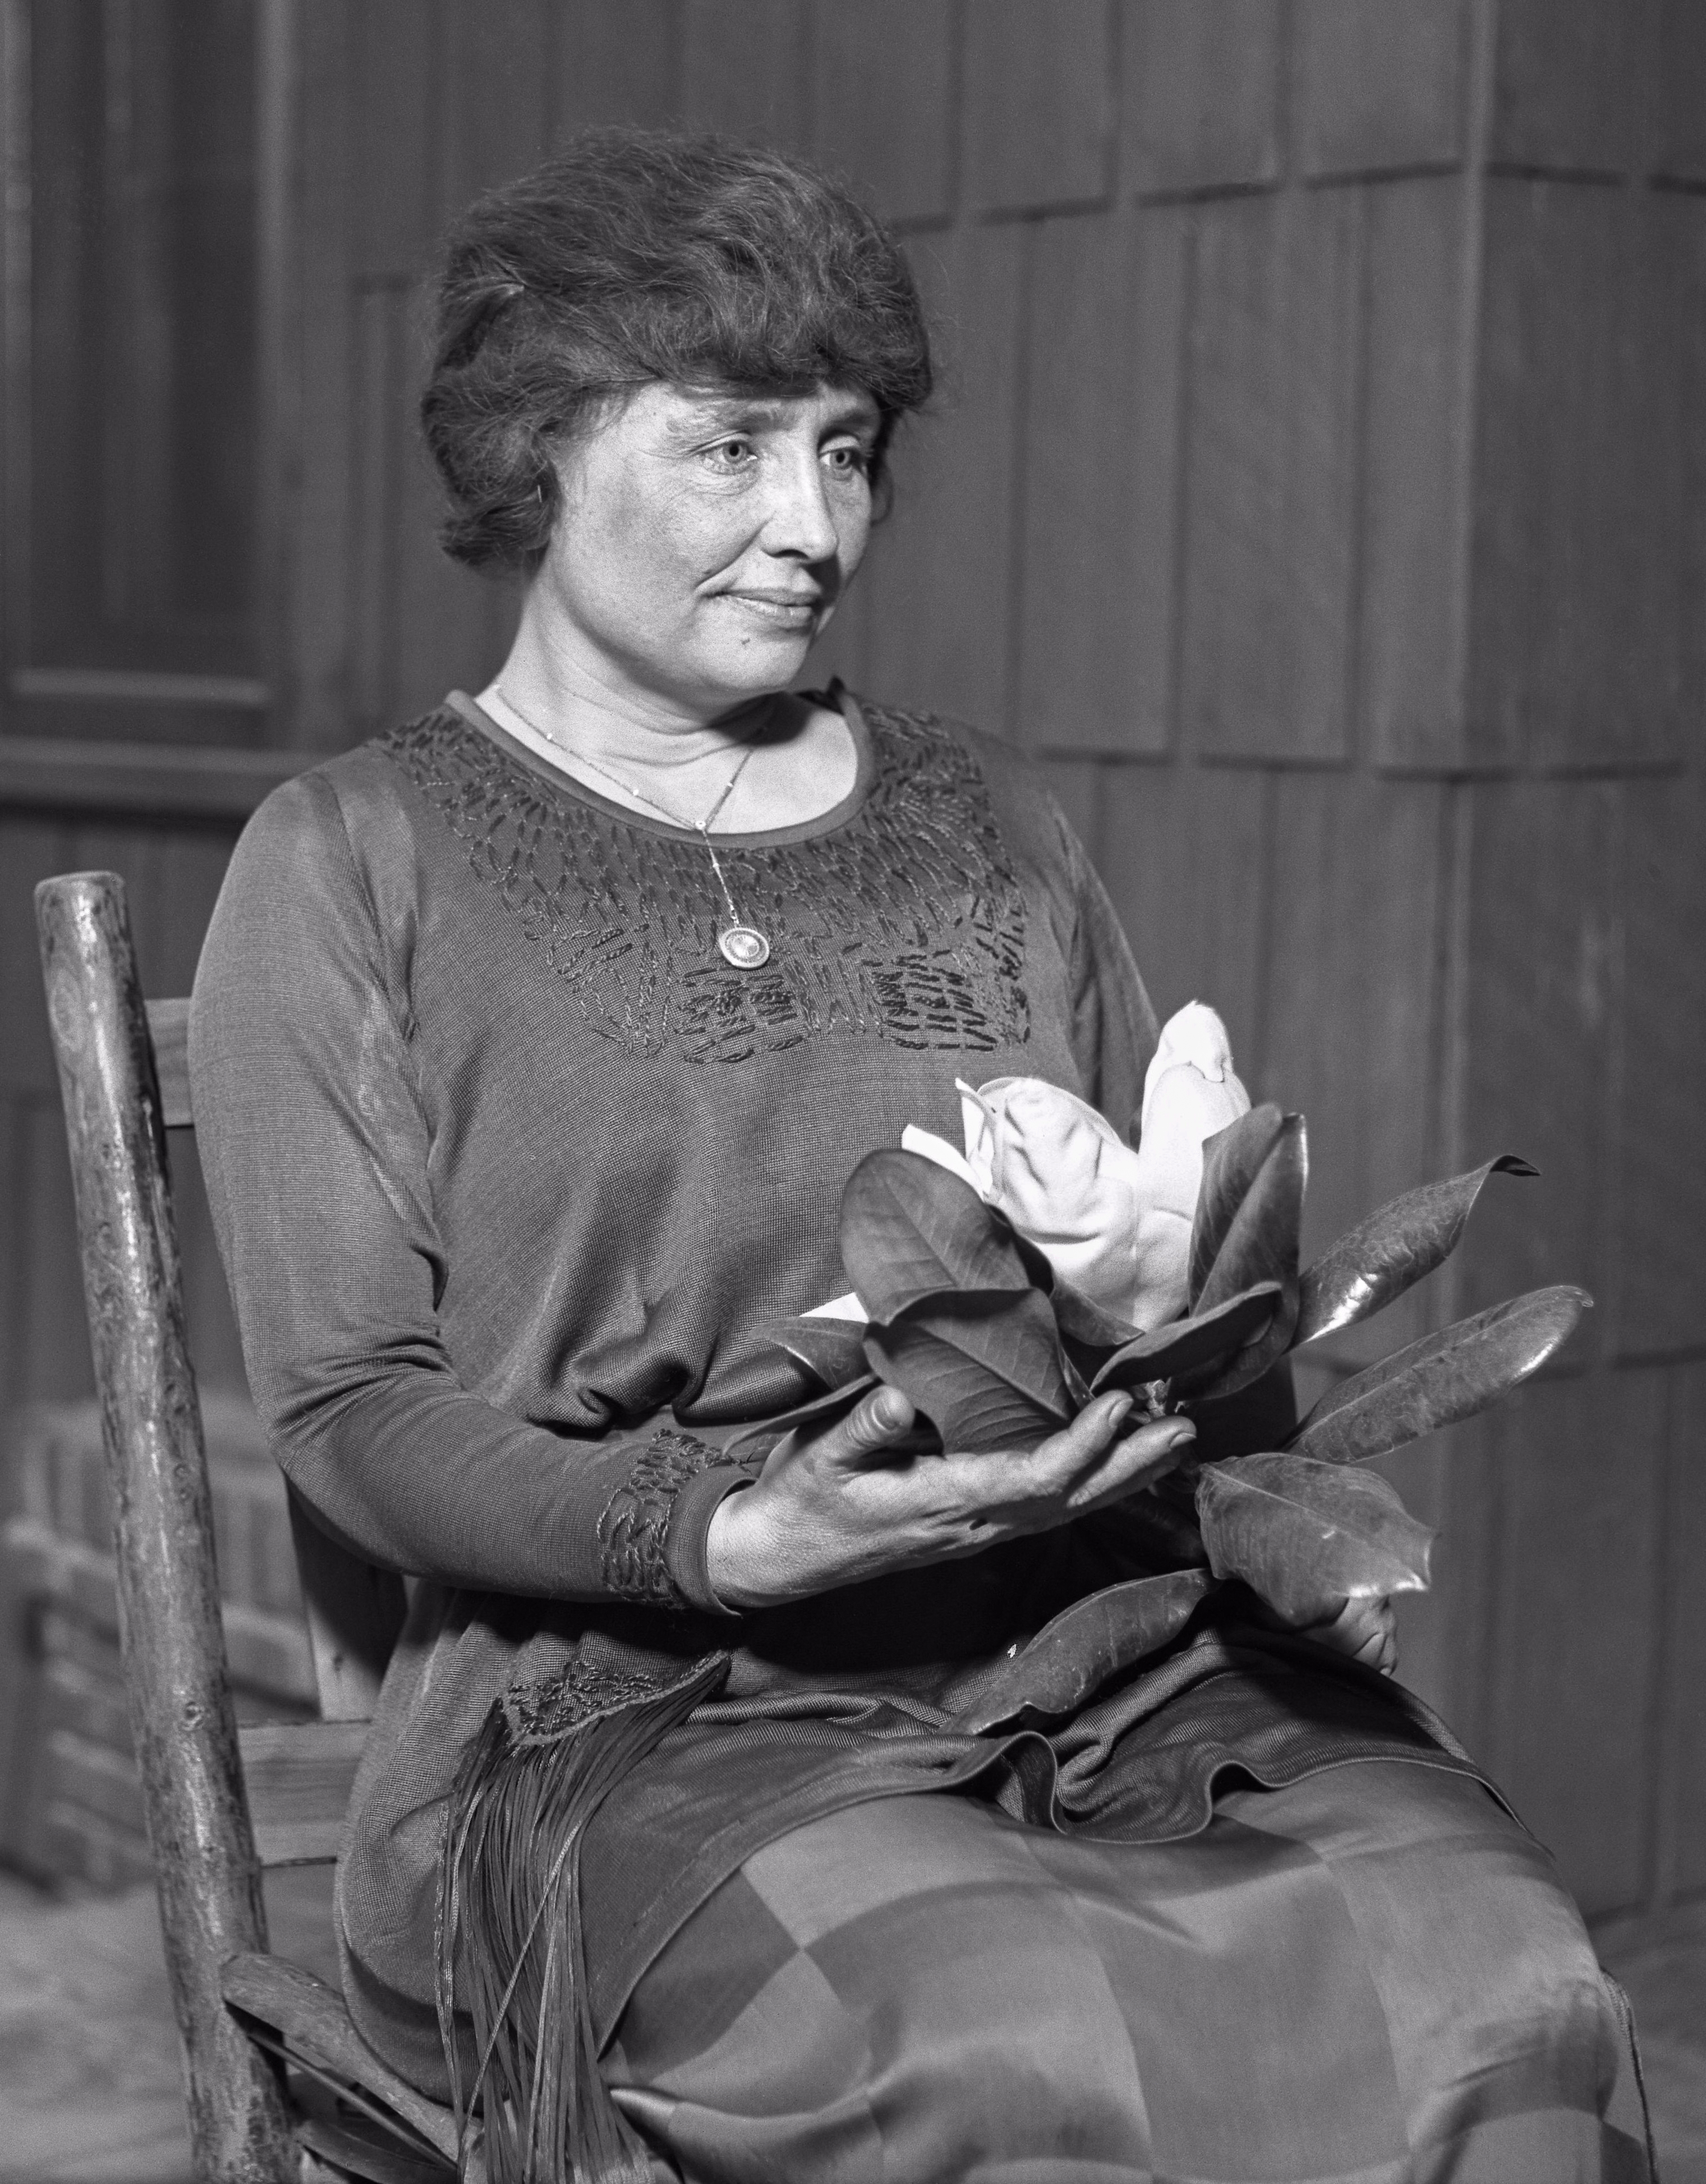 Helen Keller. CC BY 4.0 <https://creativecommons.org/licenses/by/4.0>, via Wikimedia Commons